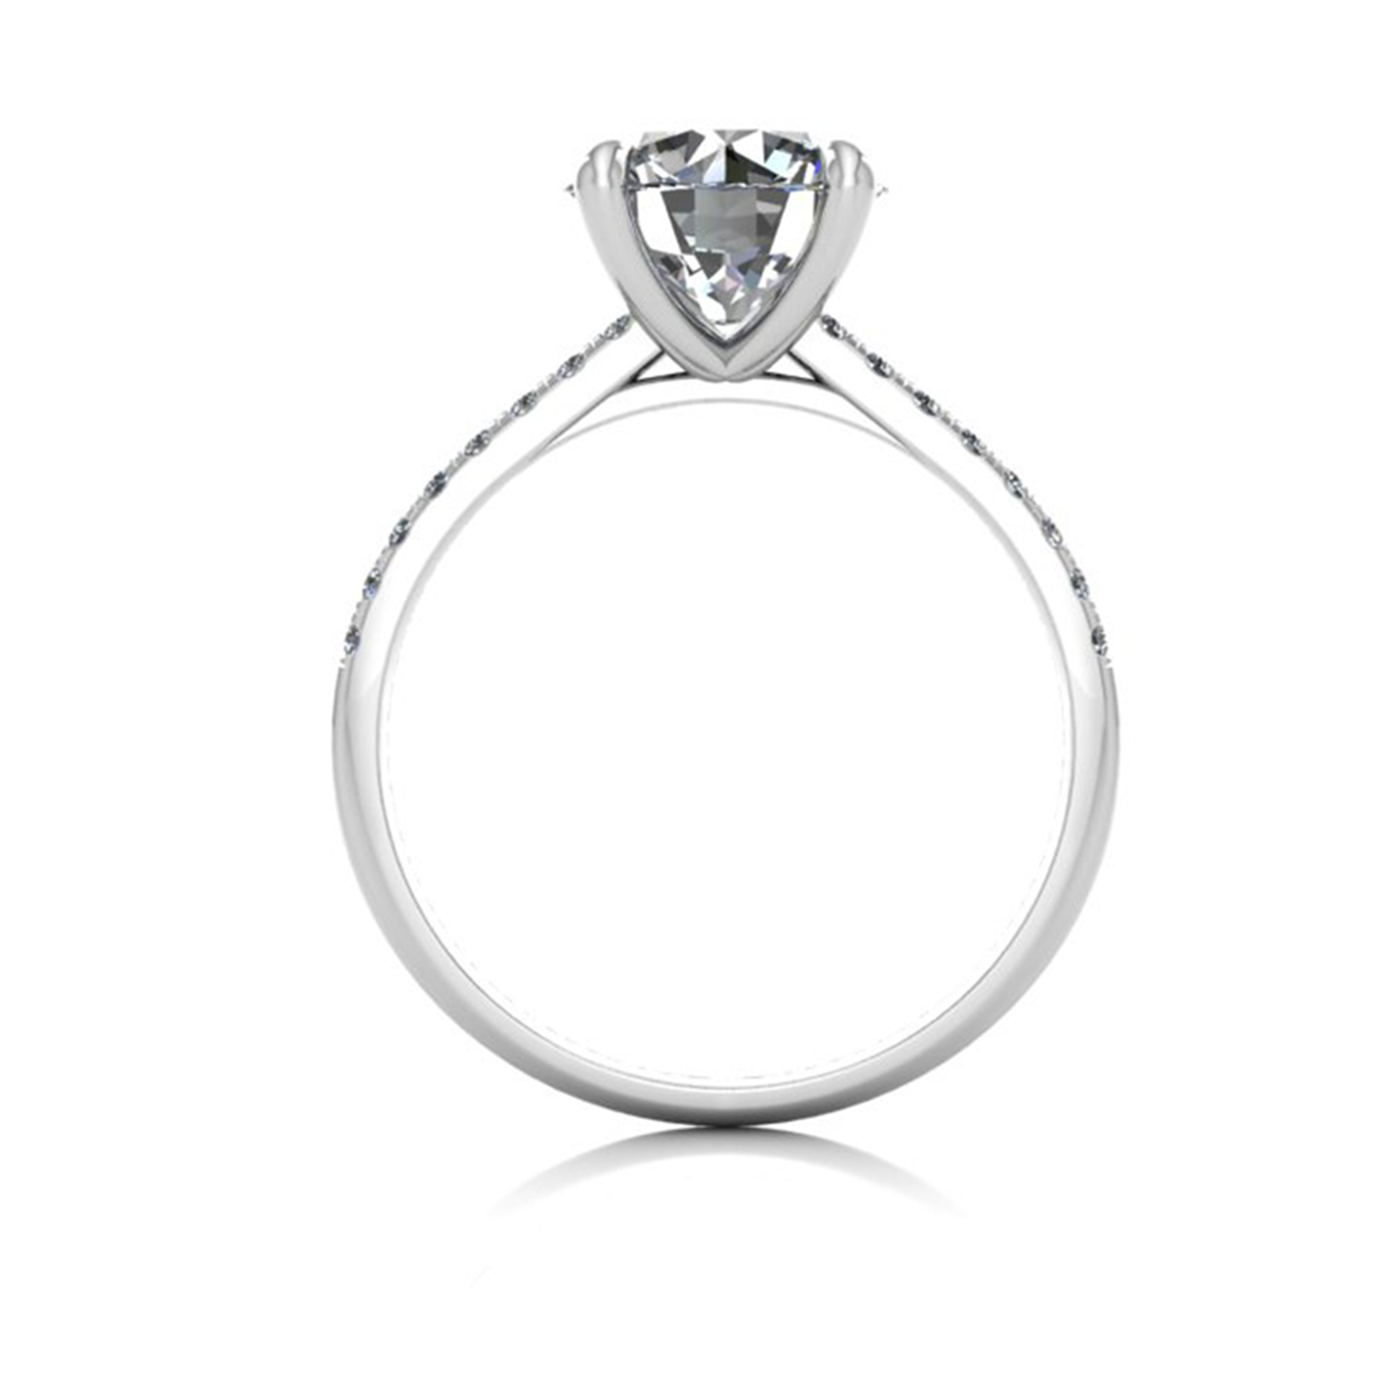 18k white gold 2.0ct 4 prongs round cut diamond engagement ring with whisper thin pavÉ set band